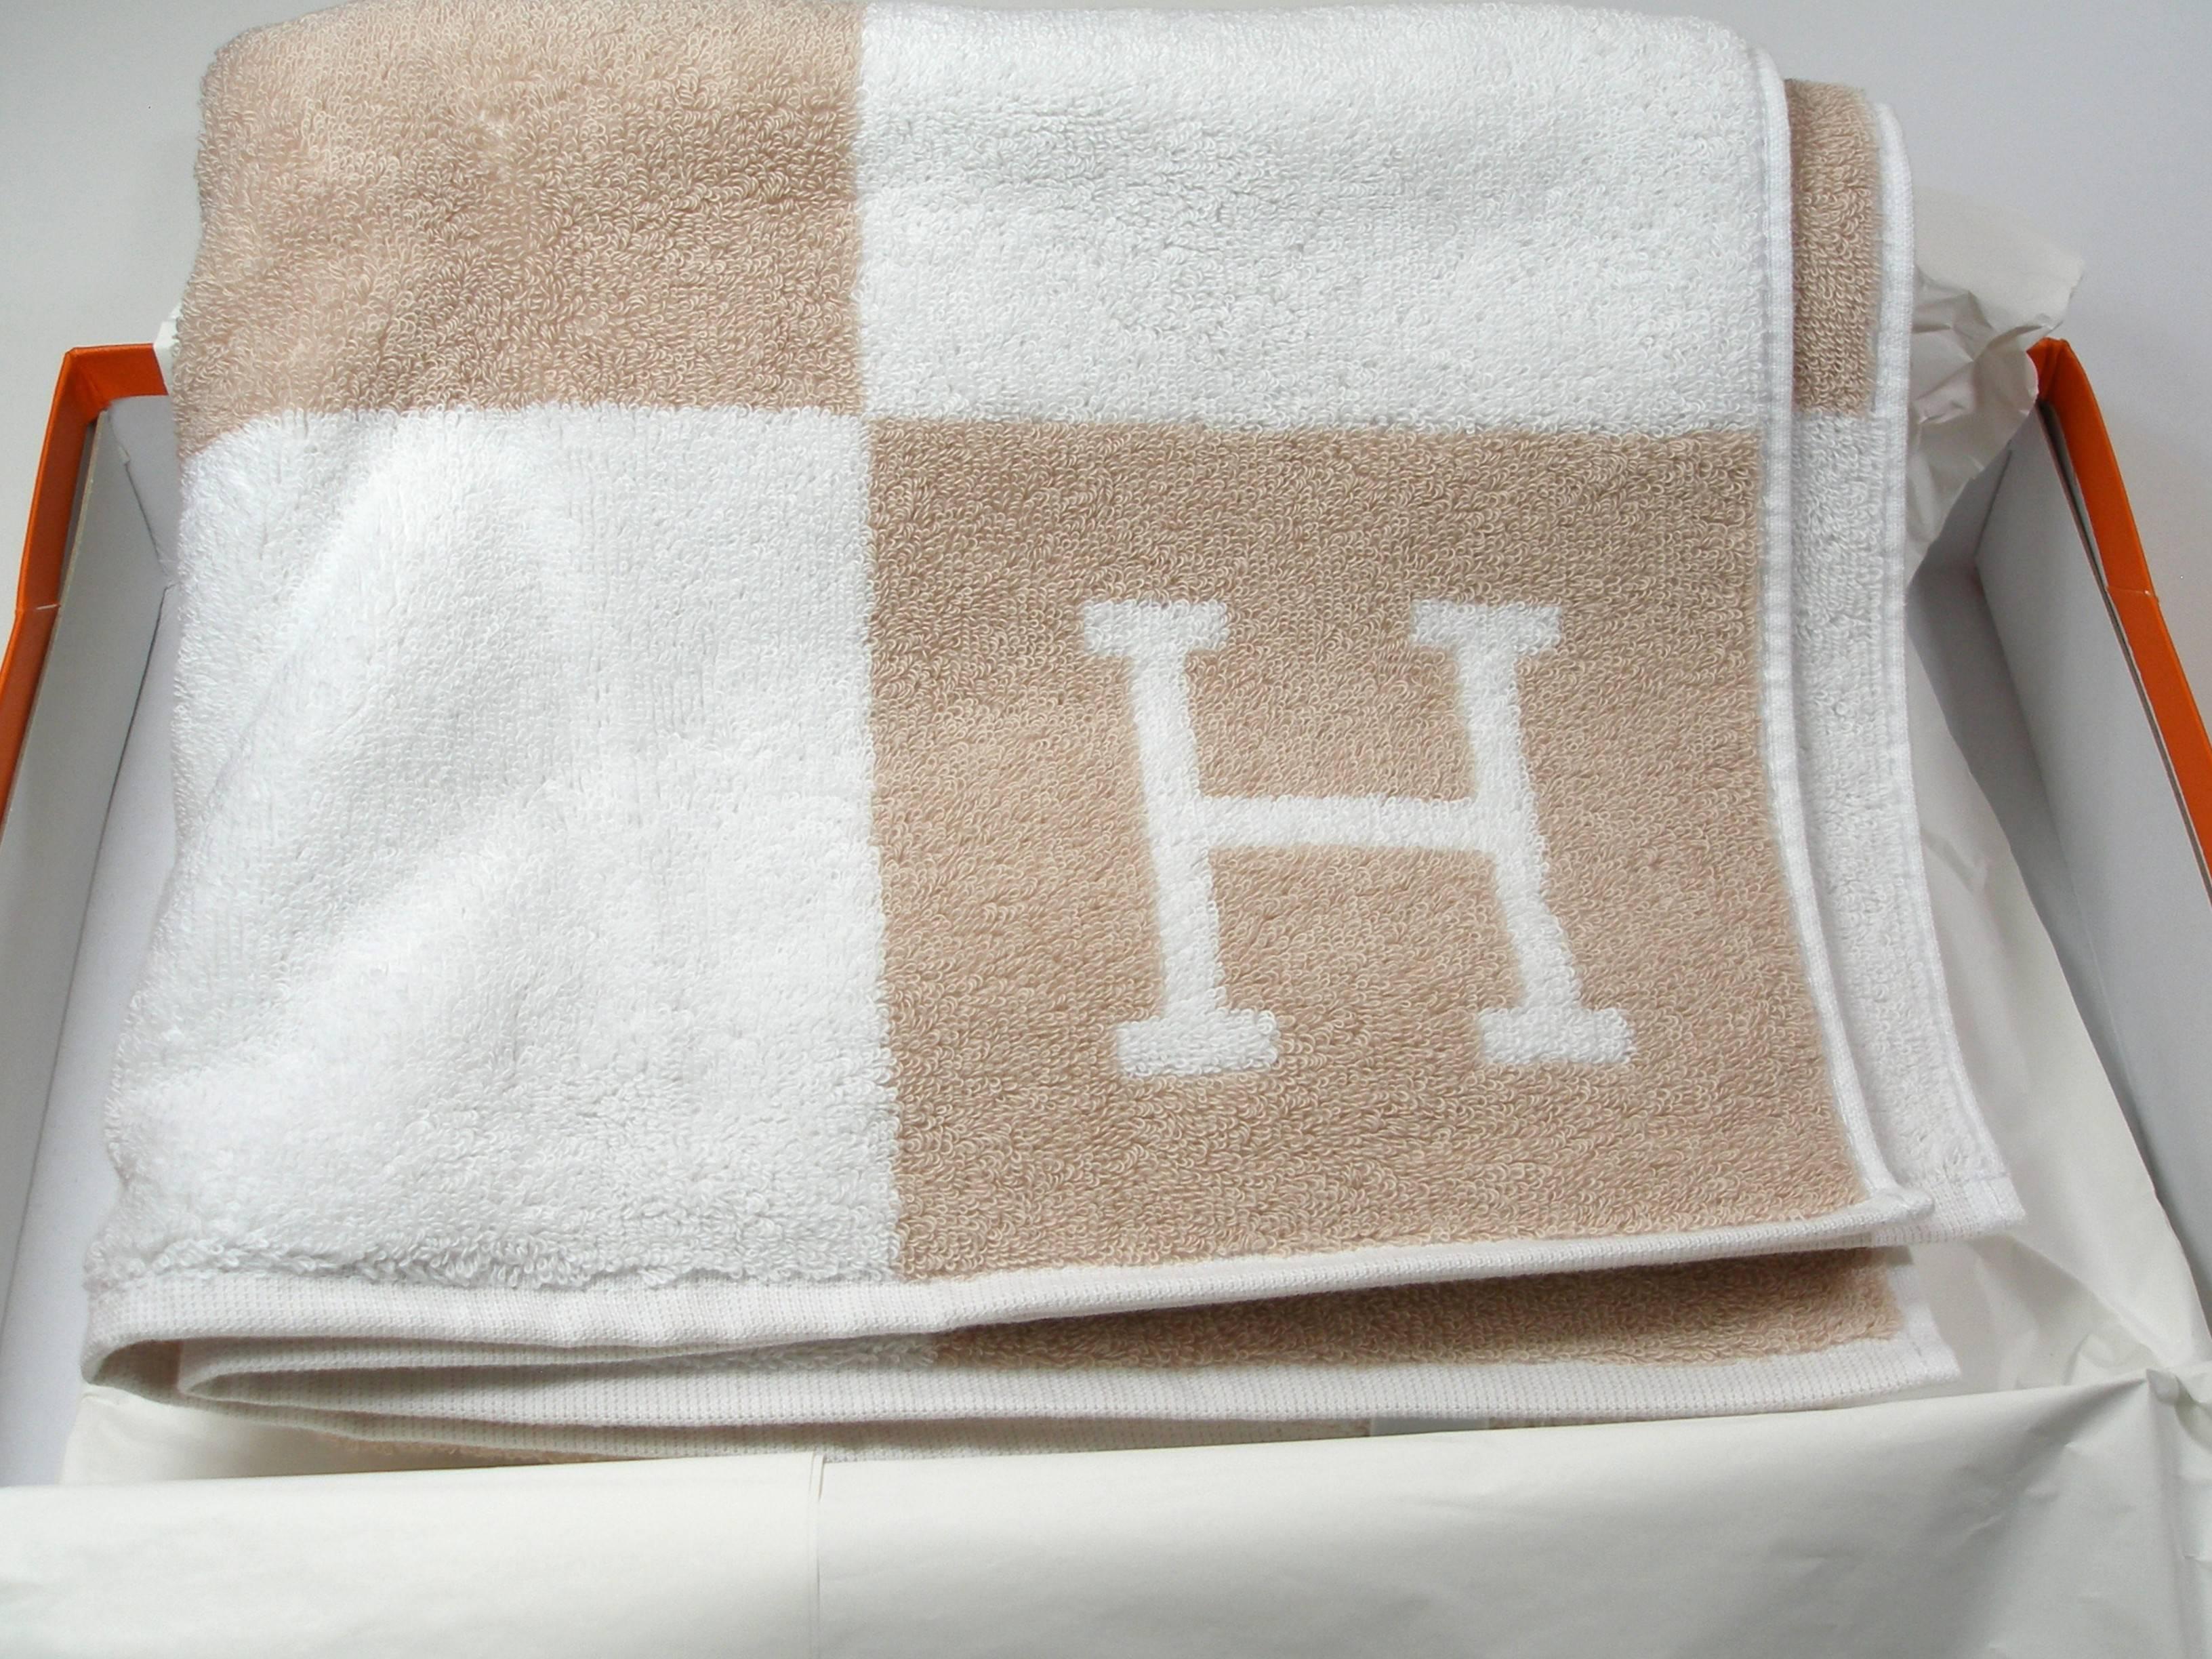 Difficulte to find in Hermès shop 
AVALON Face Towel 
100% combed cotton
Dimensions : 99 x 57 cm or 38.97 x 22.44 inches
Color : Créme and Noisette
Its comes with Hermès box and Ribbon for Xmas
READY TO SHIP !
Thank you for visiting my shop